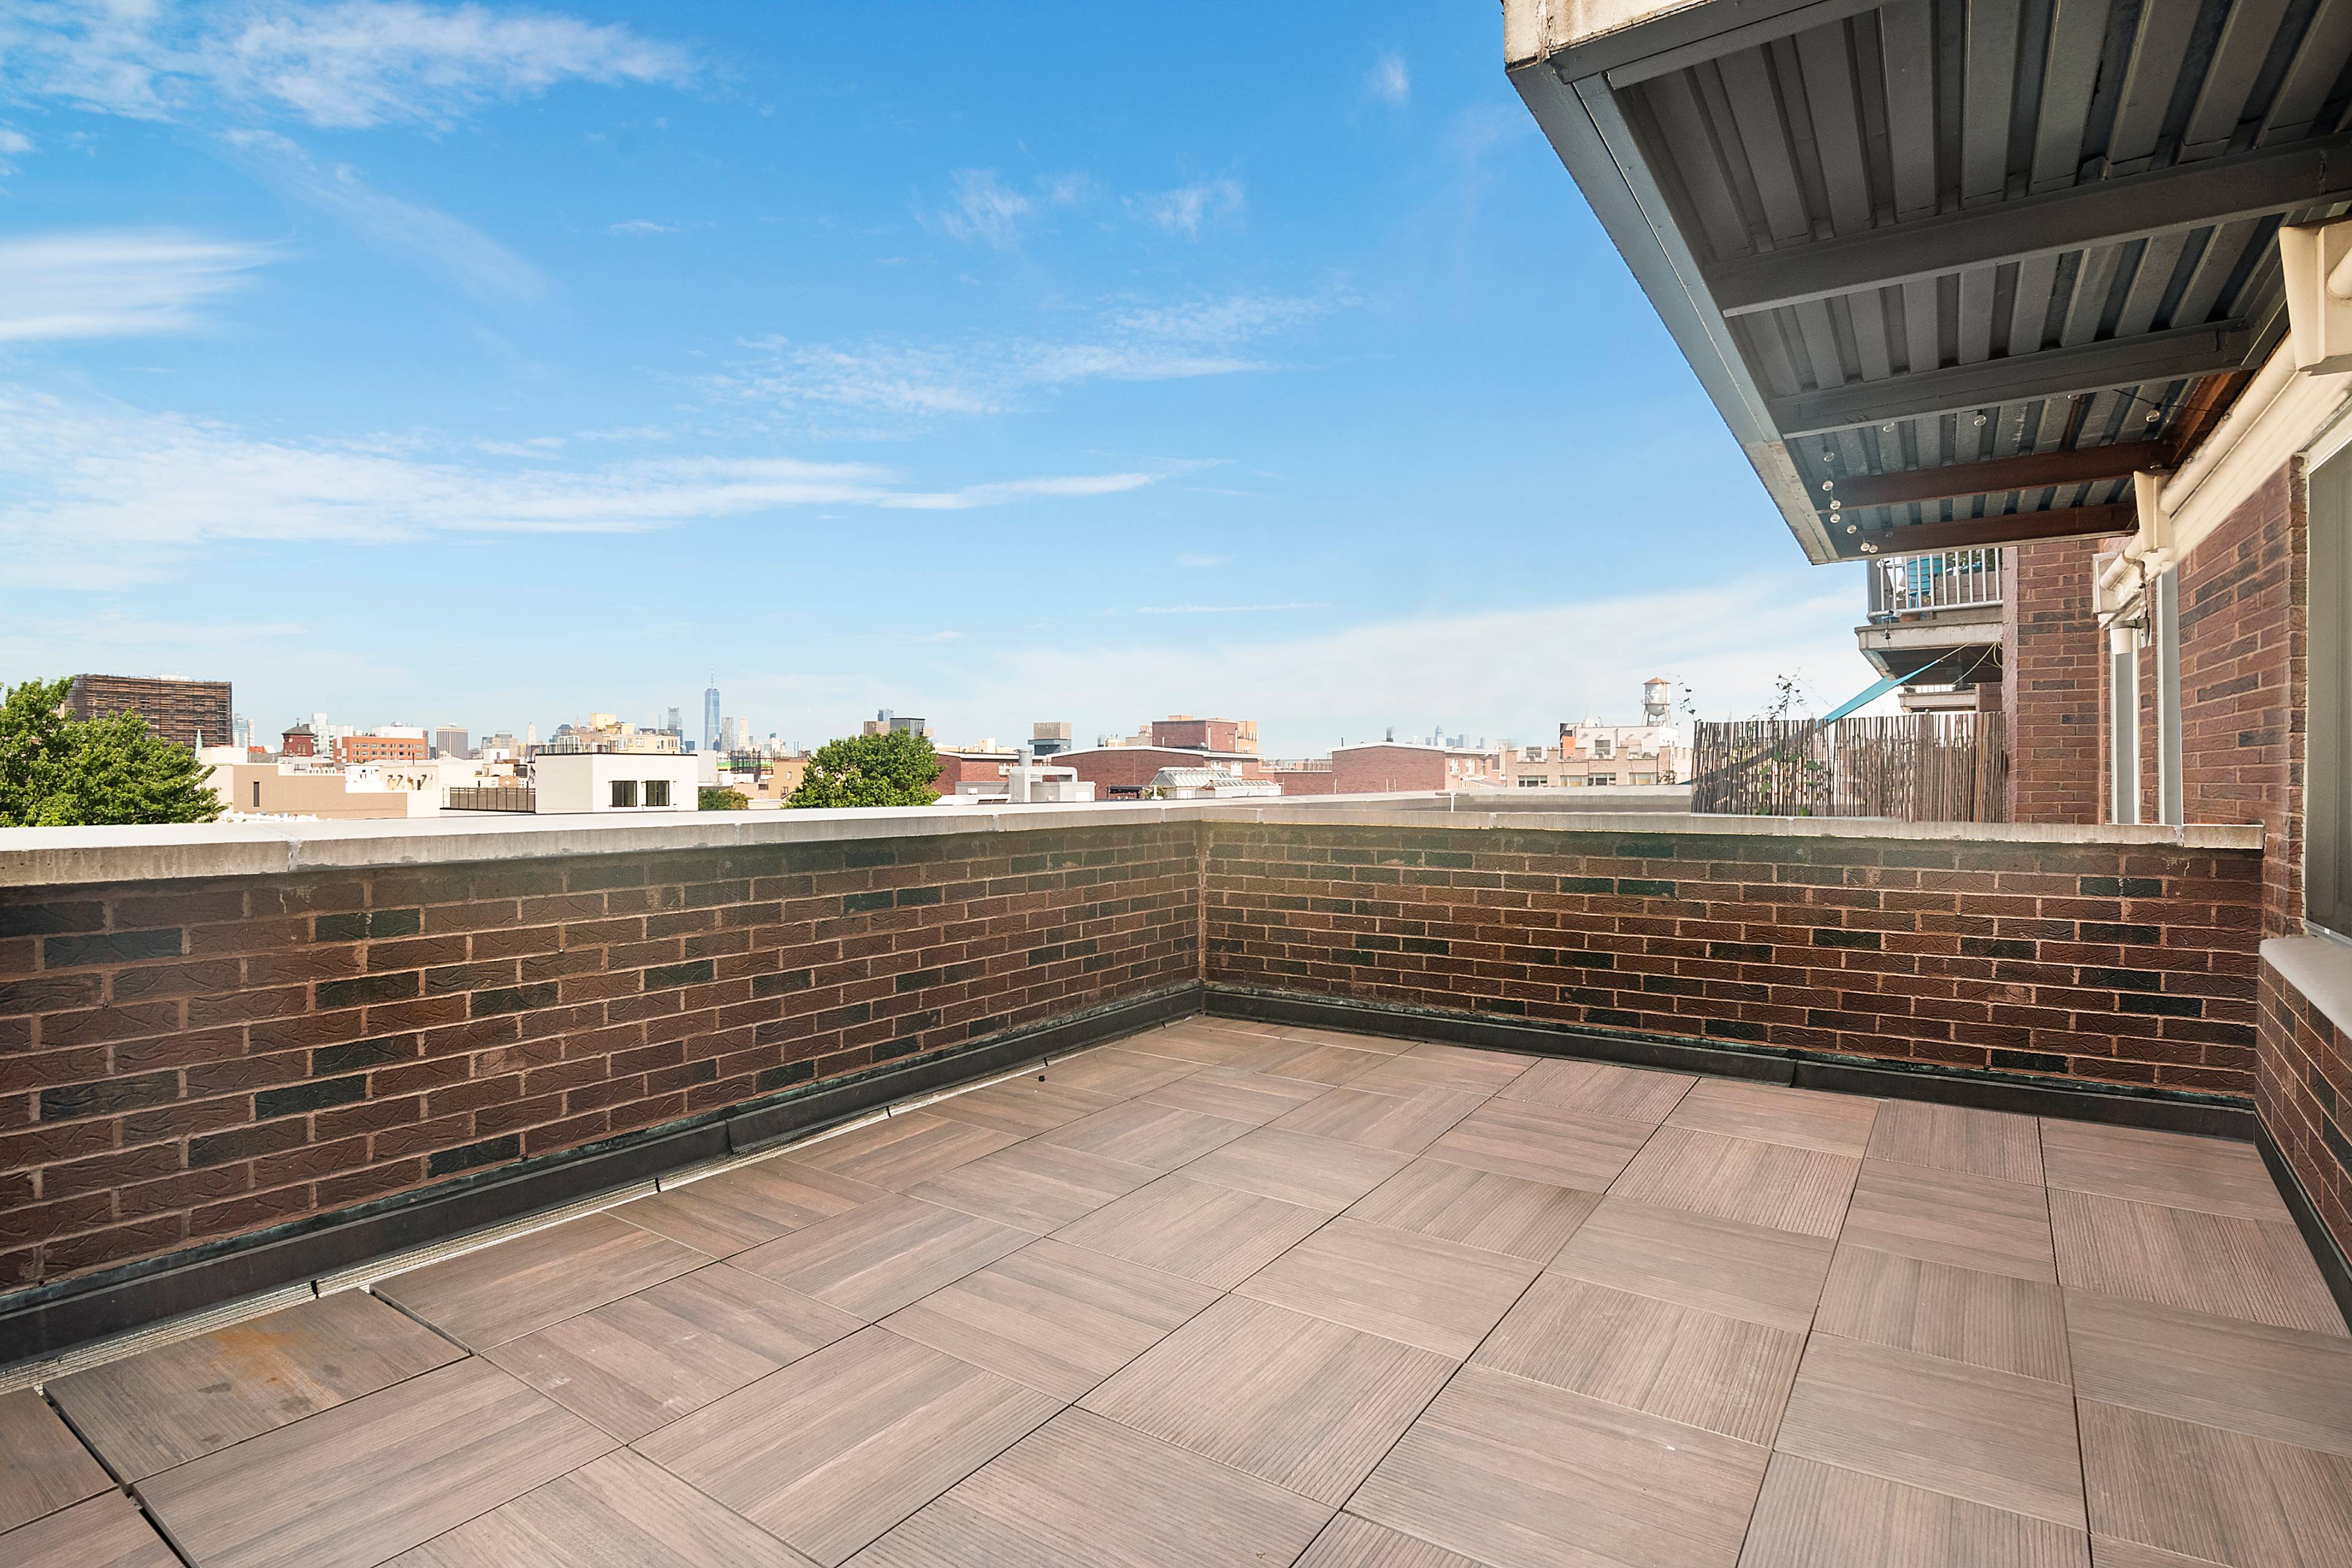 Don't sleep on this awesome 2BR plus home office apartment with awesome private terrace with eastern and western exposures for stunning NYC sunset skyline views.